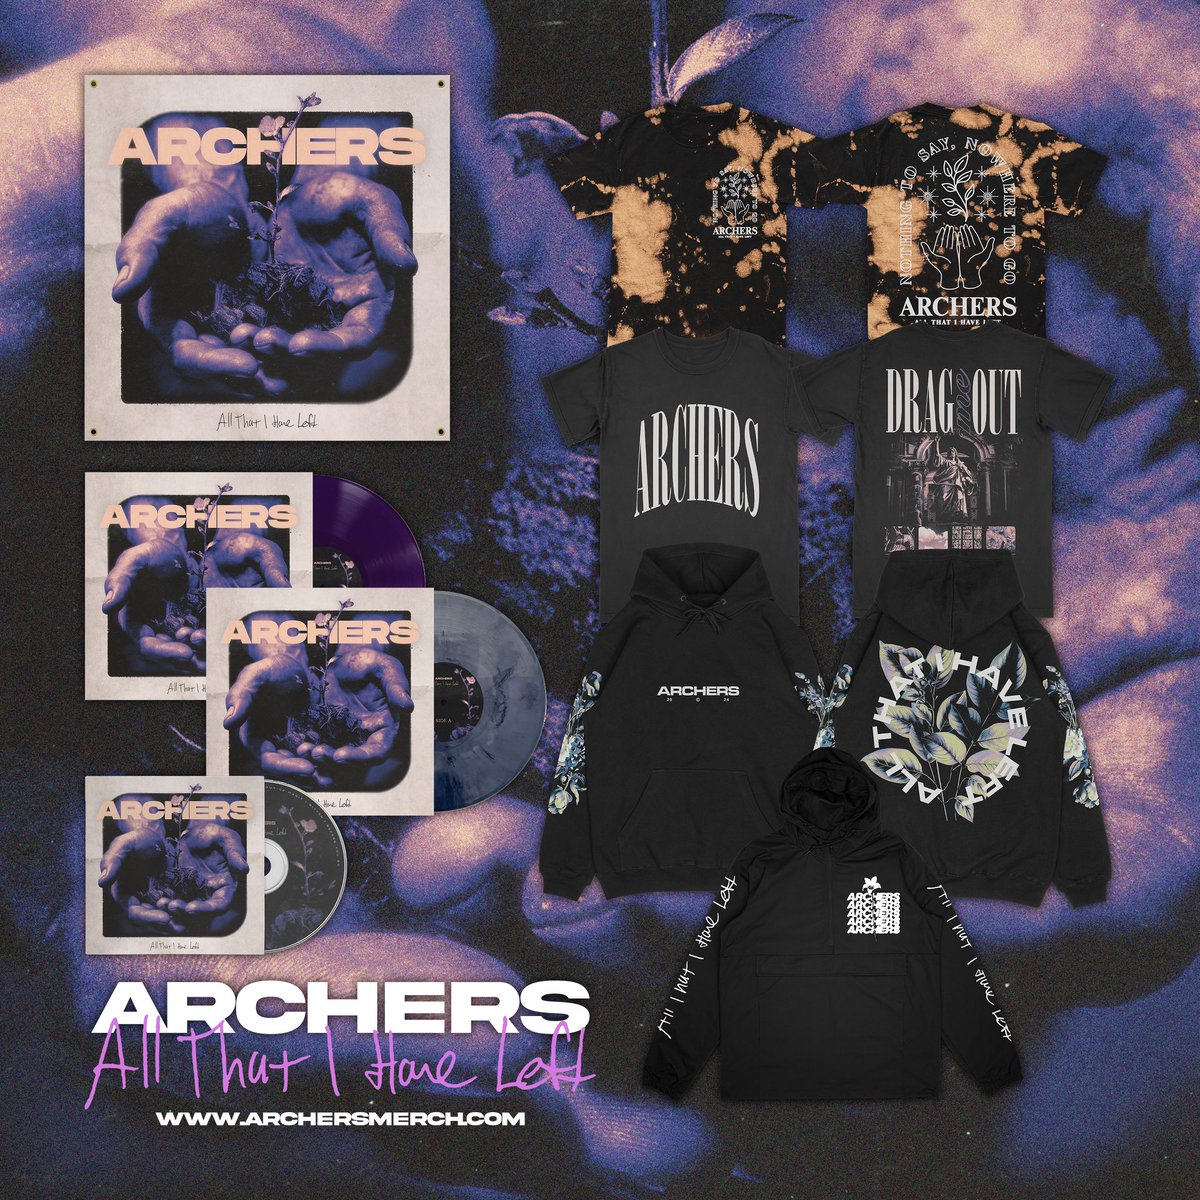 We are less than 3 weeks away from the release of All That I Have Left! We have limited pre-order merch, cds, and vinyl. Both vinyl variants are already over half sold out so don’t miss out on your chance to get yours! archersmerch.com